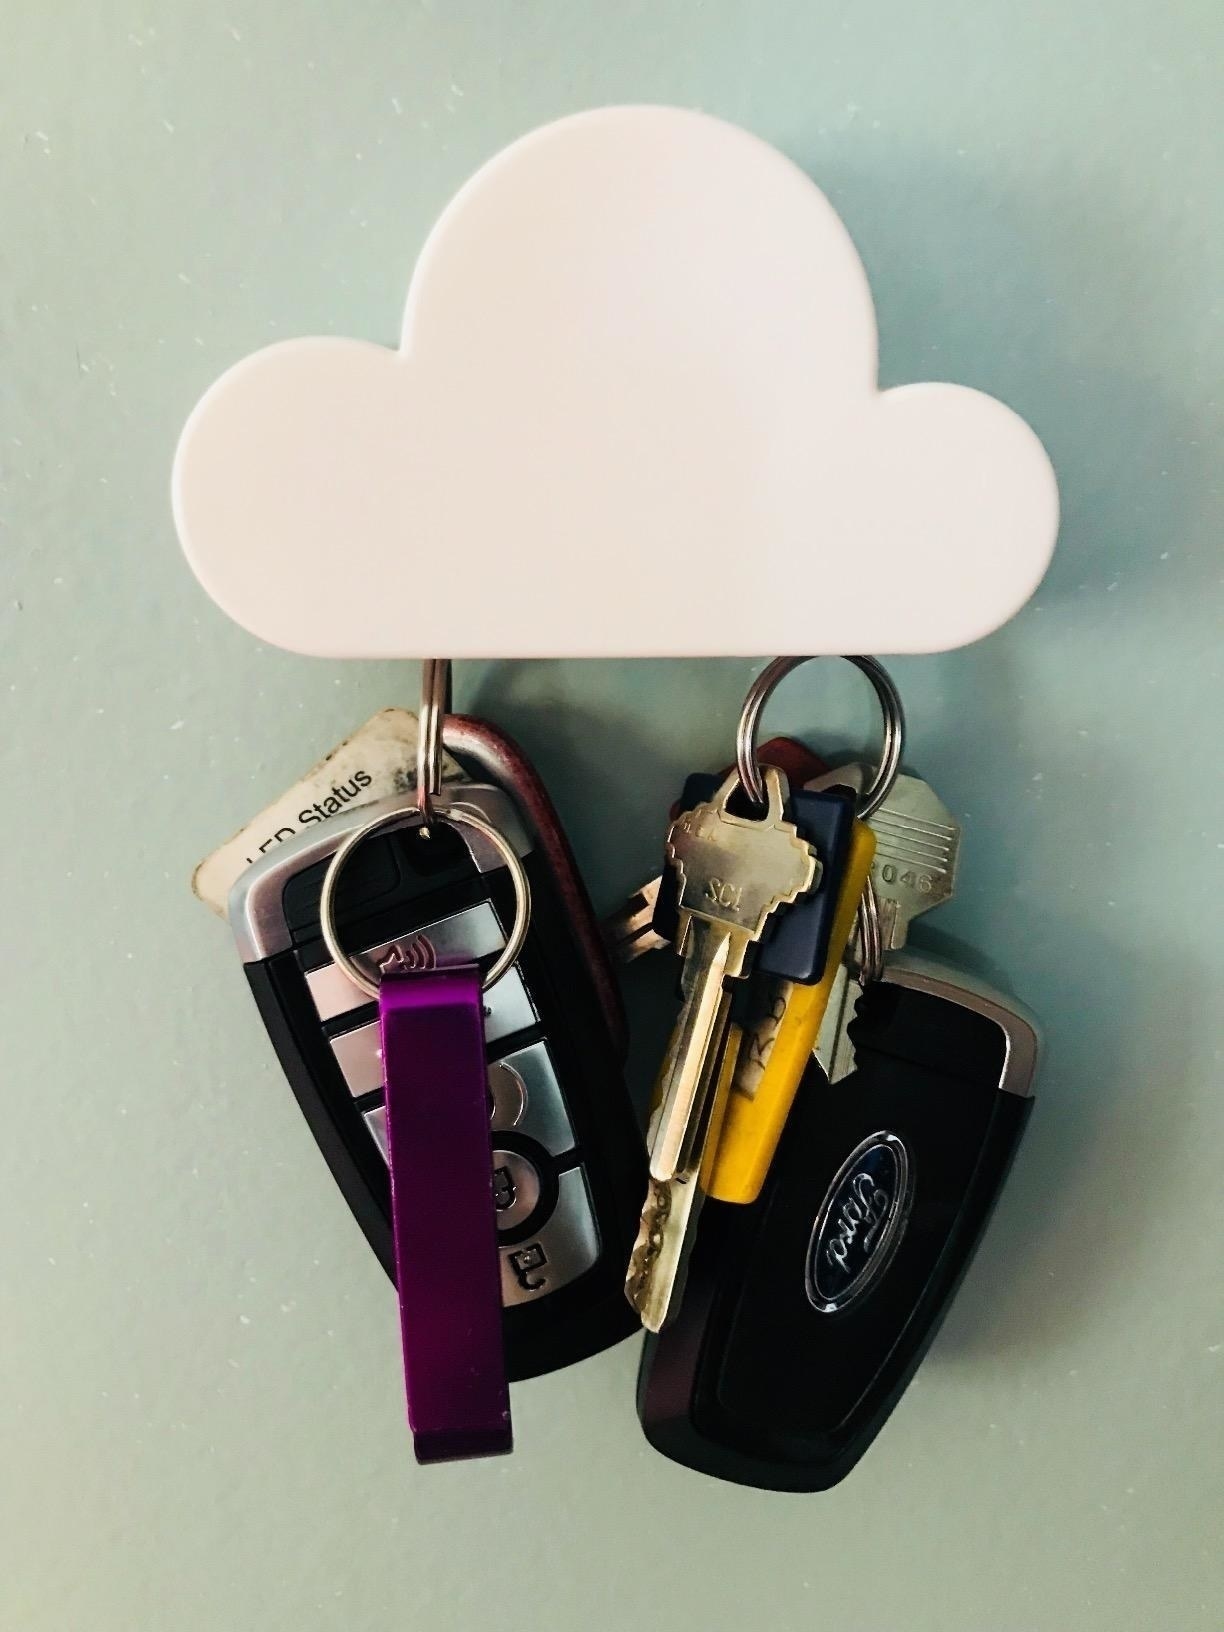 The cloud holding two sets of keys in place